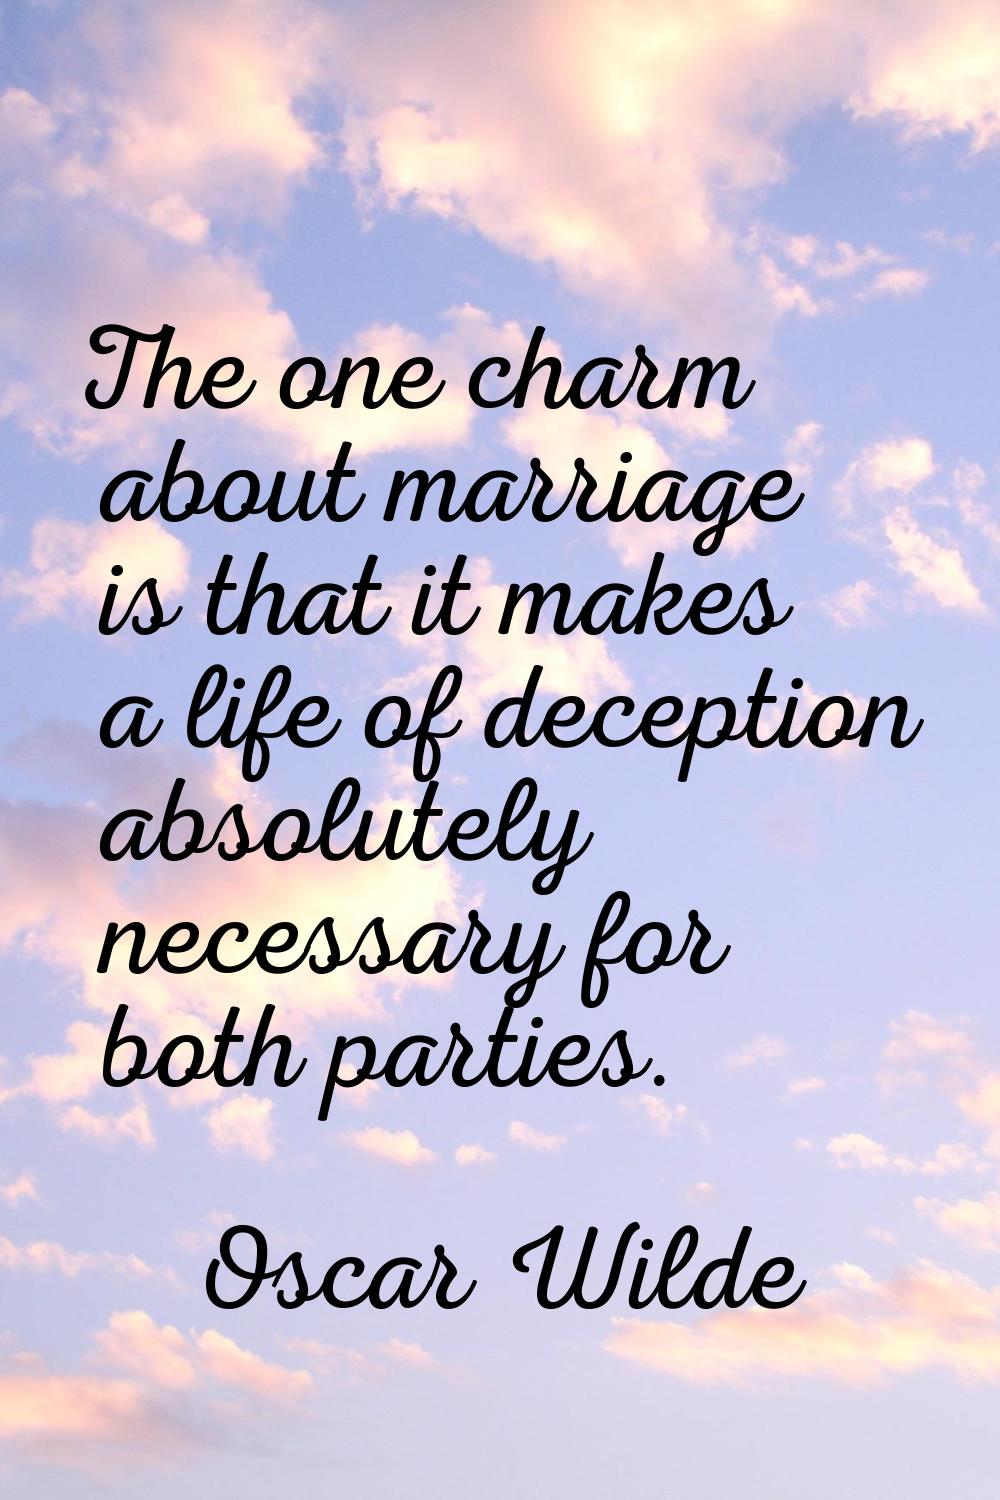 The one charm about marriage is that it makes a life of deception absolutely necessary for both par